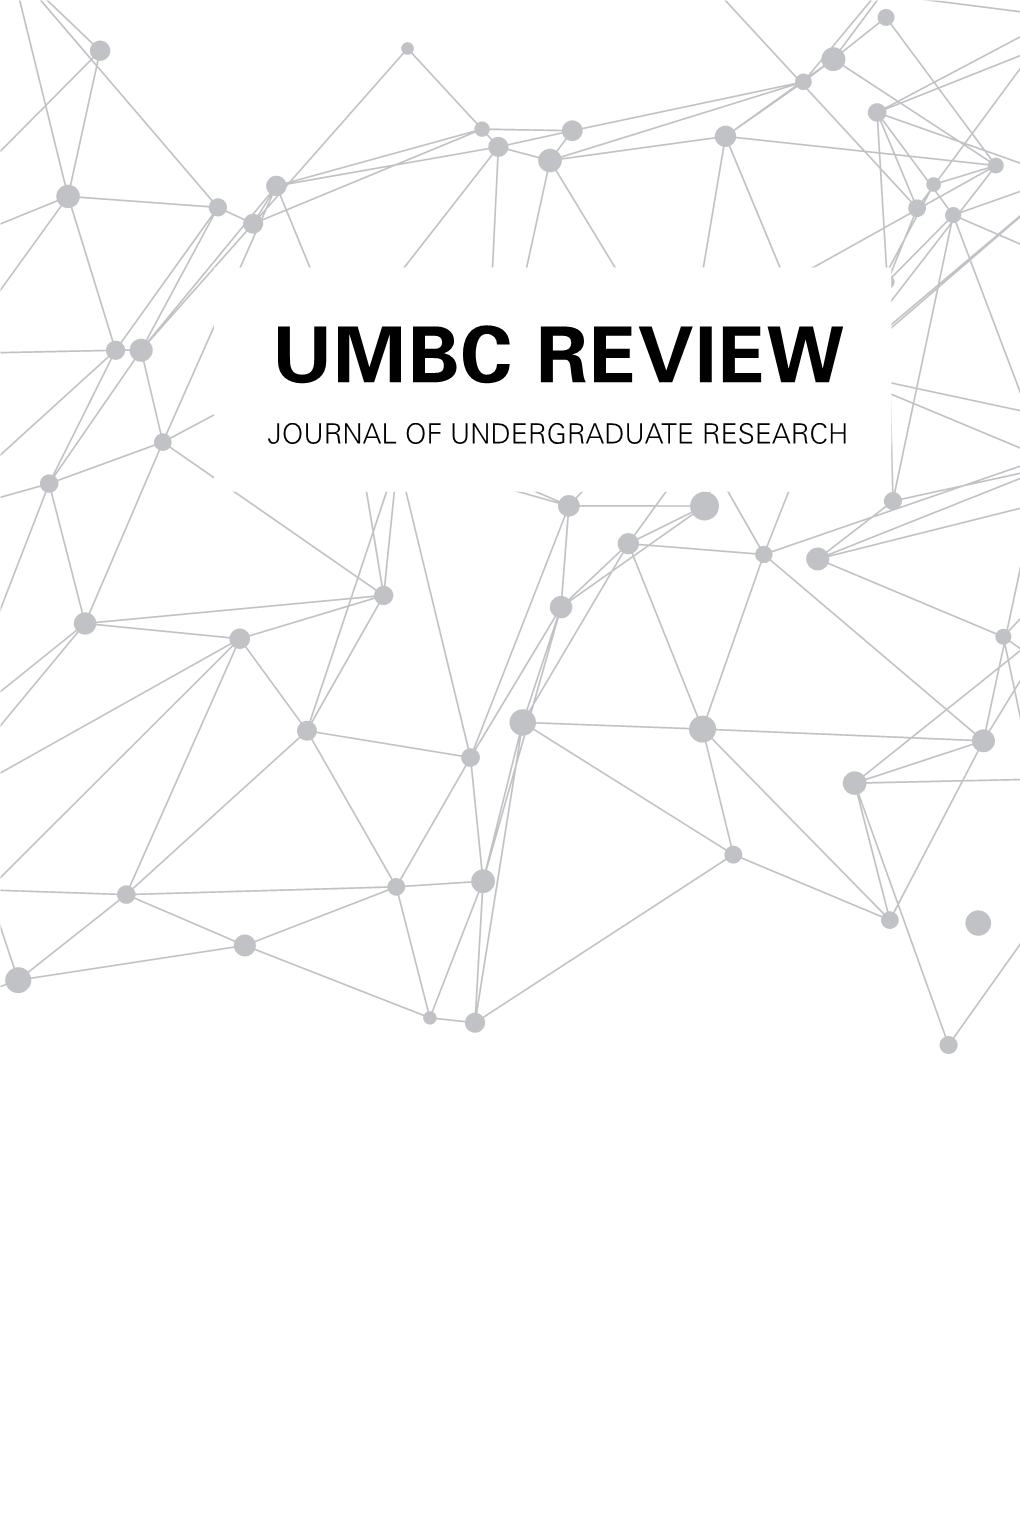 UMBC REVIEW JOURNAL of UNDERGRADUATE RESEARCH © COPYRIGHT 2019 University of Maryland, Baltimore County, UMBC ALL RIGHTS RESERVED